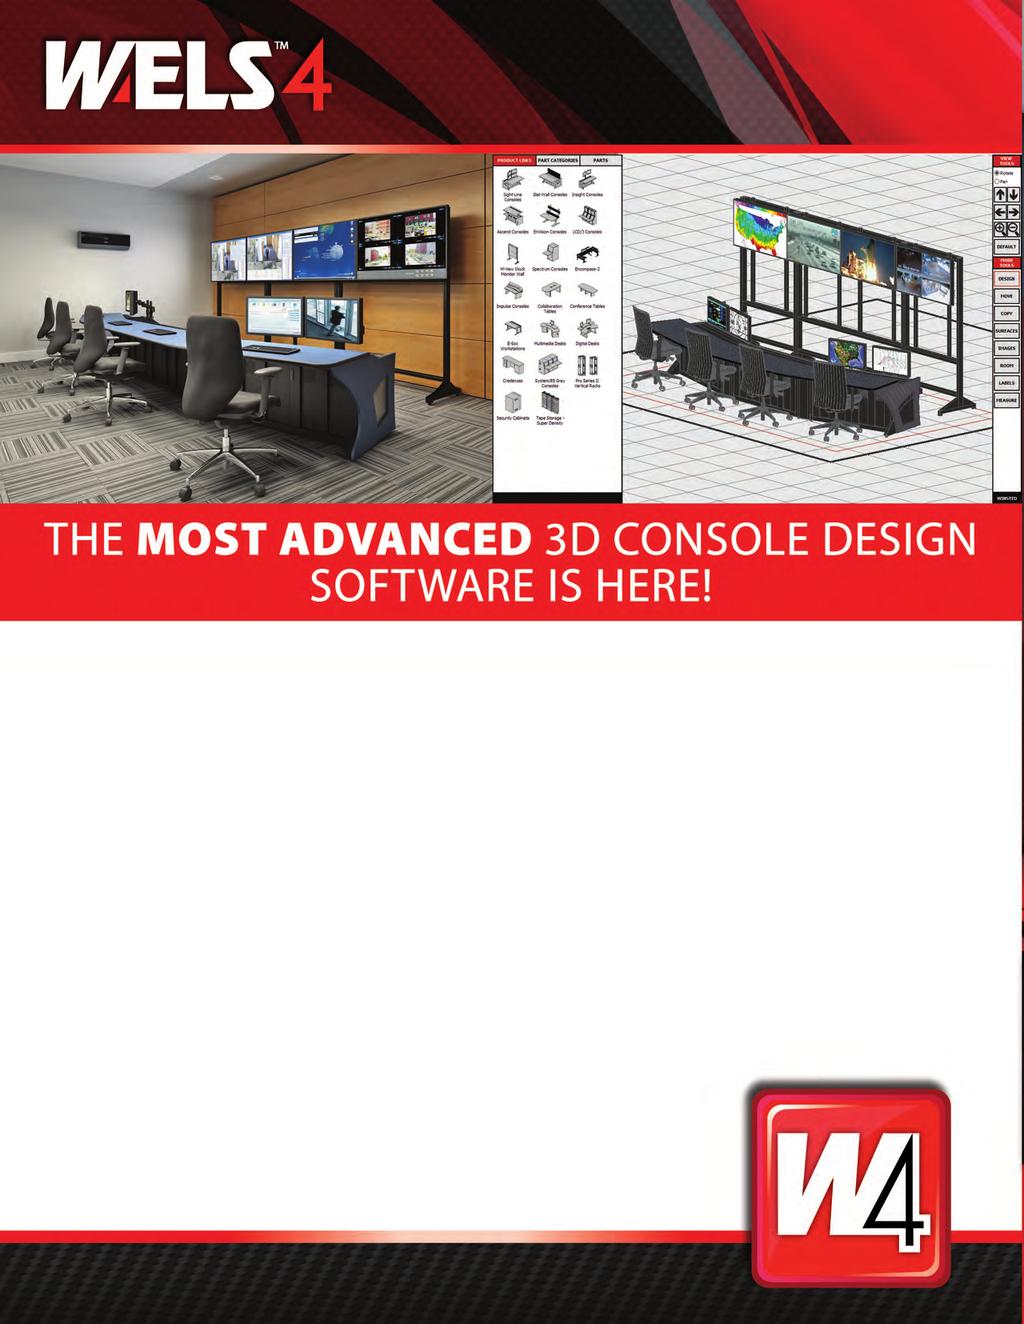 WINSTED EQUIPMENT LAYOUT SOFTWARE WELS IS A WINSTED-EXCLUSIVE CONSOLE DESIGN SOFTWARE TOOL THAT MAKES CONTROL ROOM DESIGN AND LAYOUT FAST, EASY, ACCURATE AND FUN!